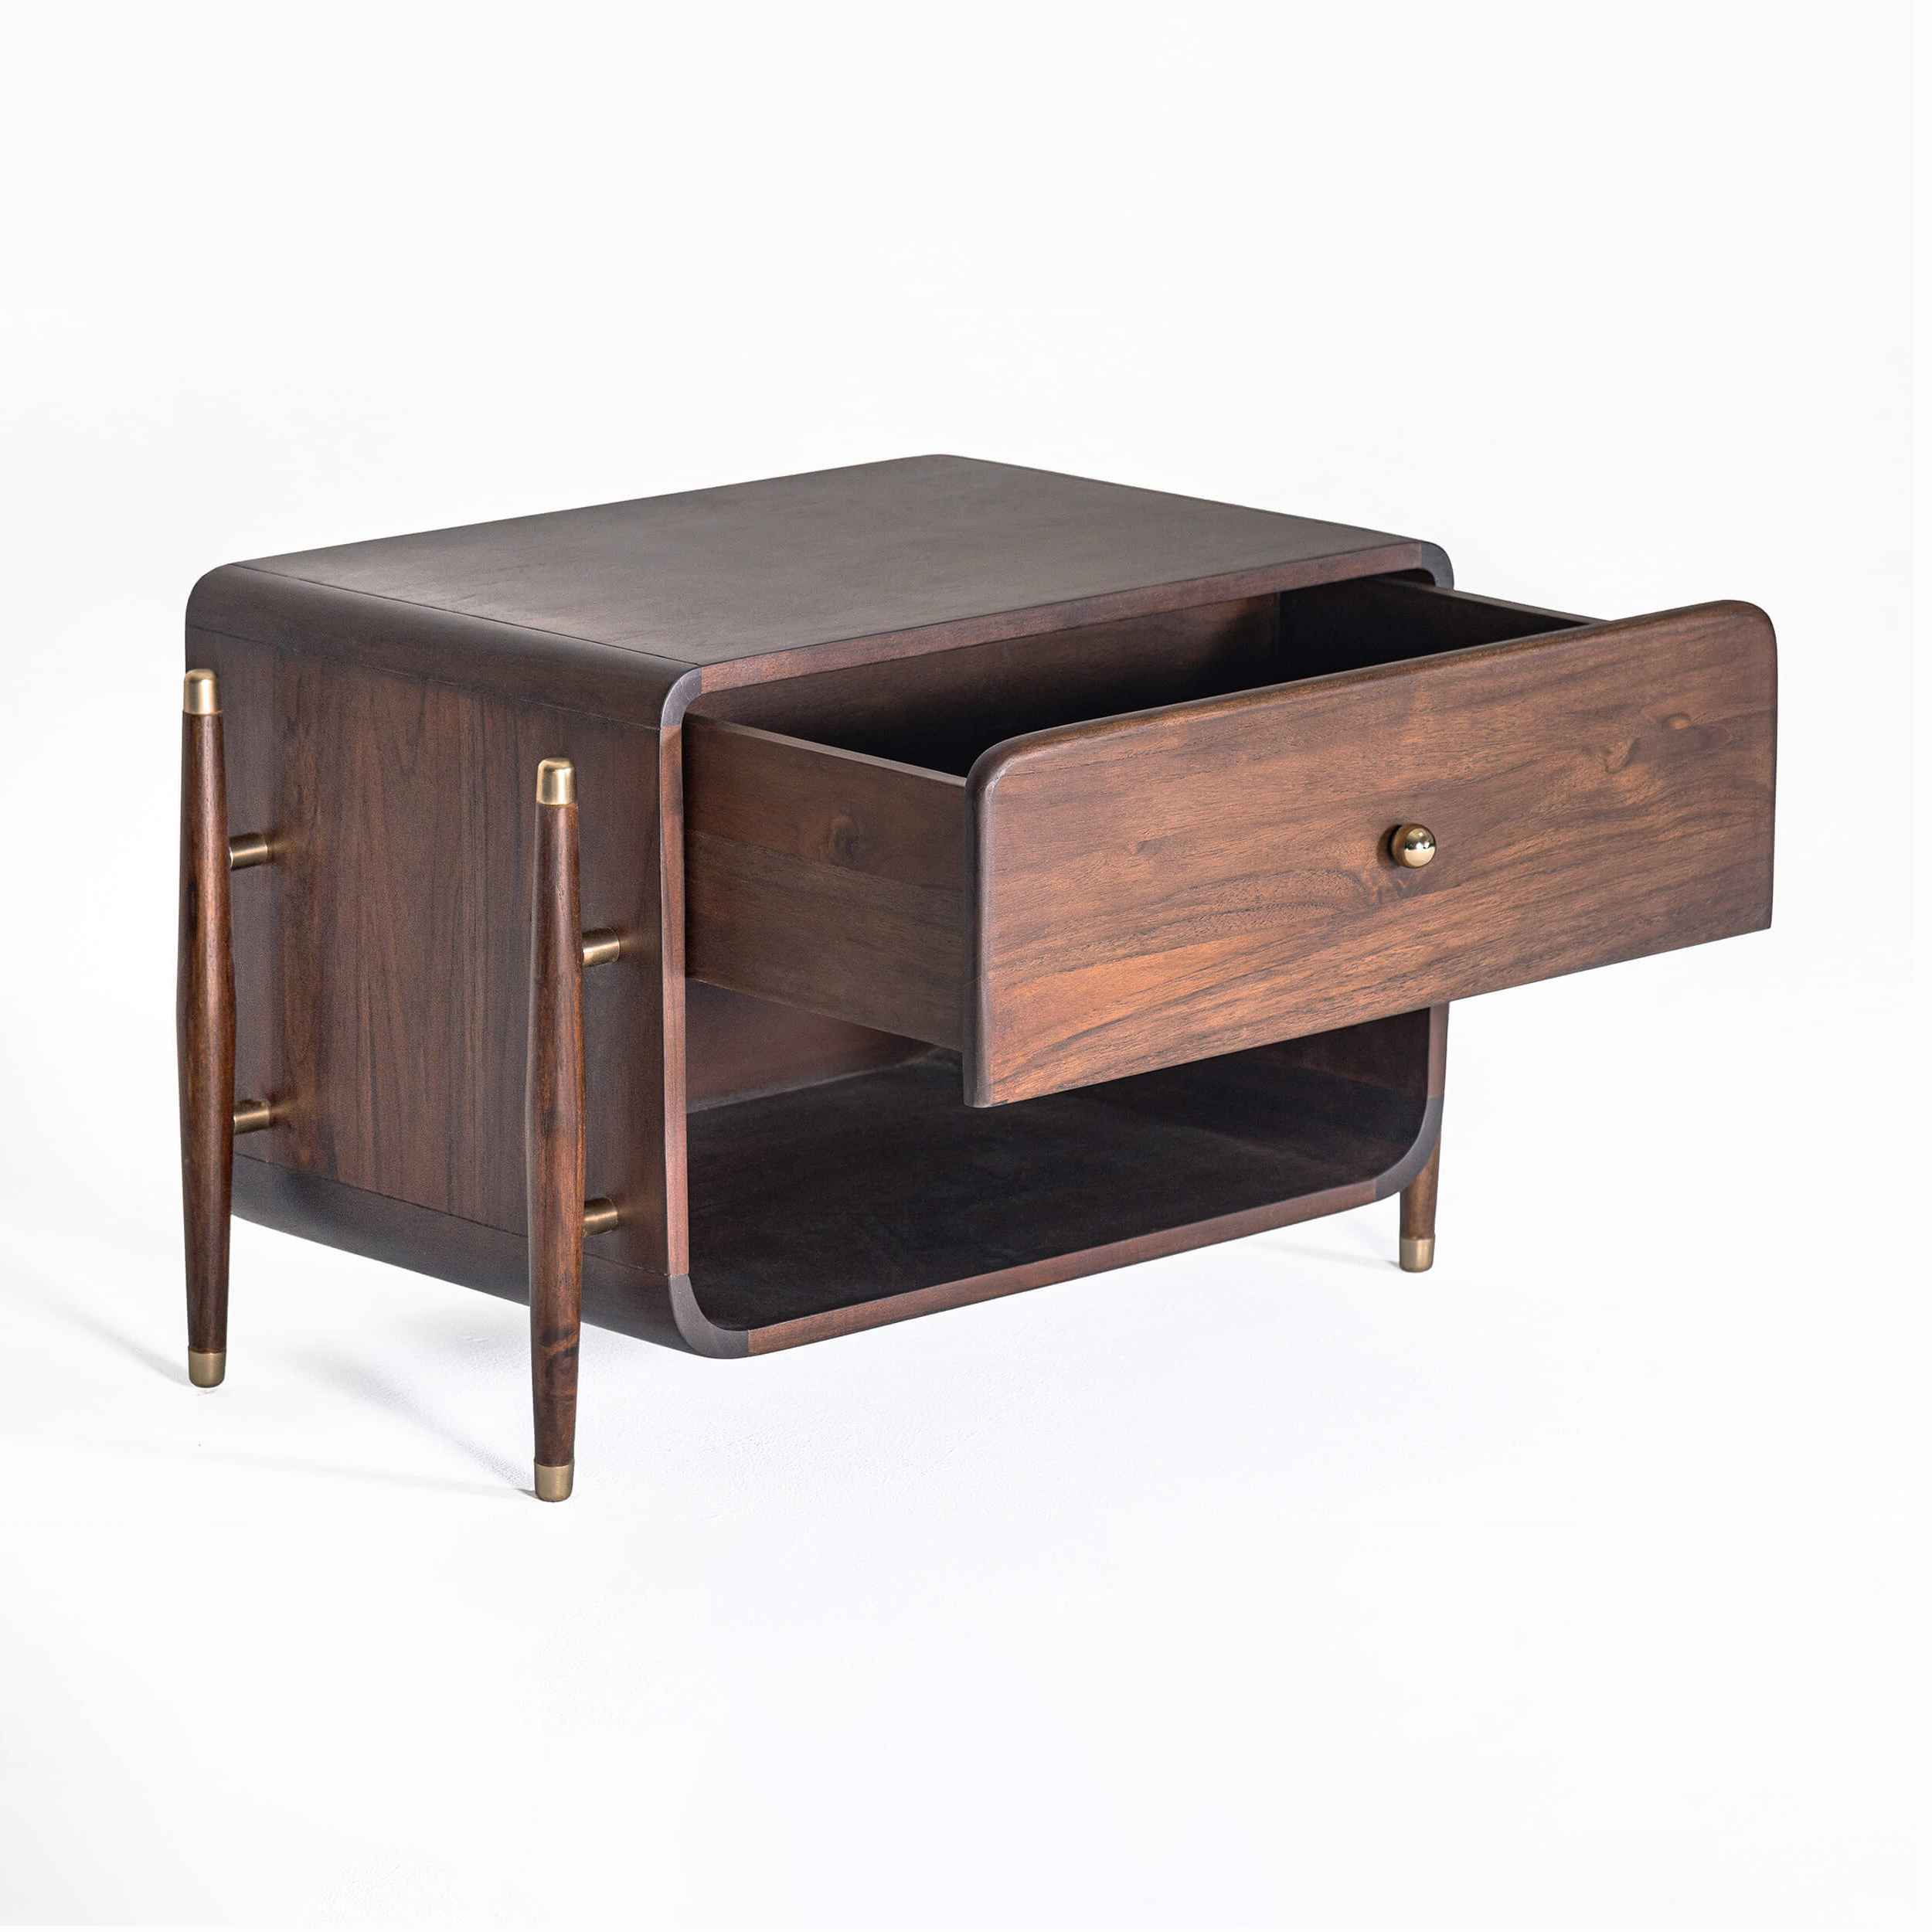 Modernist Wood & Lacquer Nightstand – Winter Wood